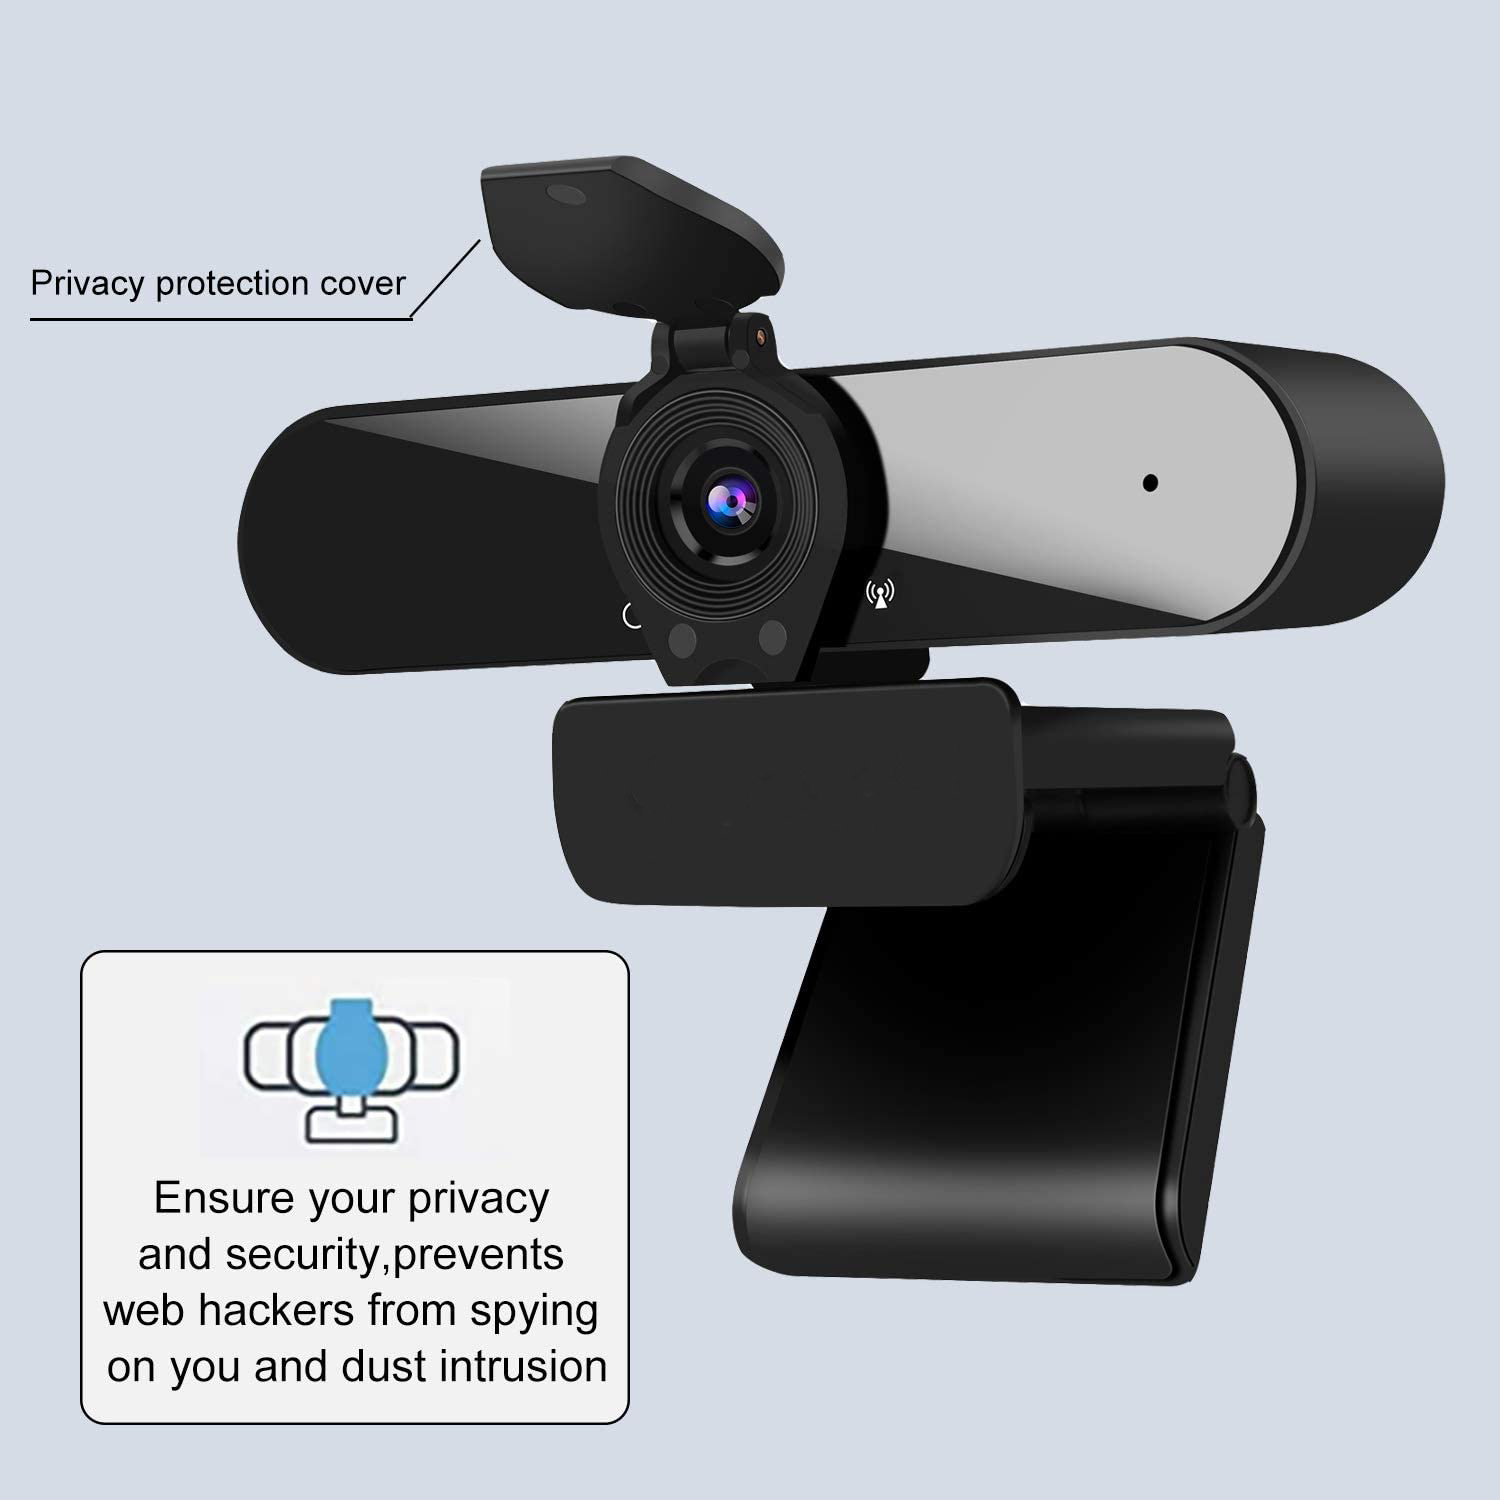 Webcam 1440P HD Computer Camera, Autofocus USB PC Webcam with Microphone, HD Wide-Angle Webcam,Laptop Desktop Full HD Camera Video Webcam,Pro Streaming Webcam for Recording,Calling Conferencing,Gaming - image 3 of 9